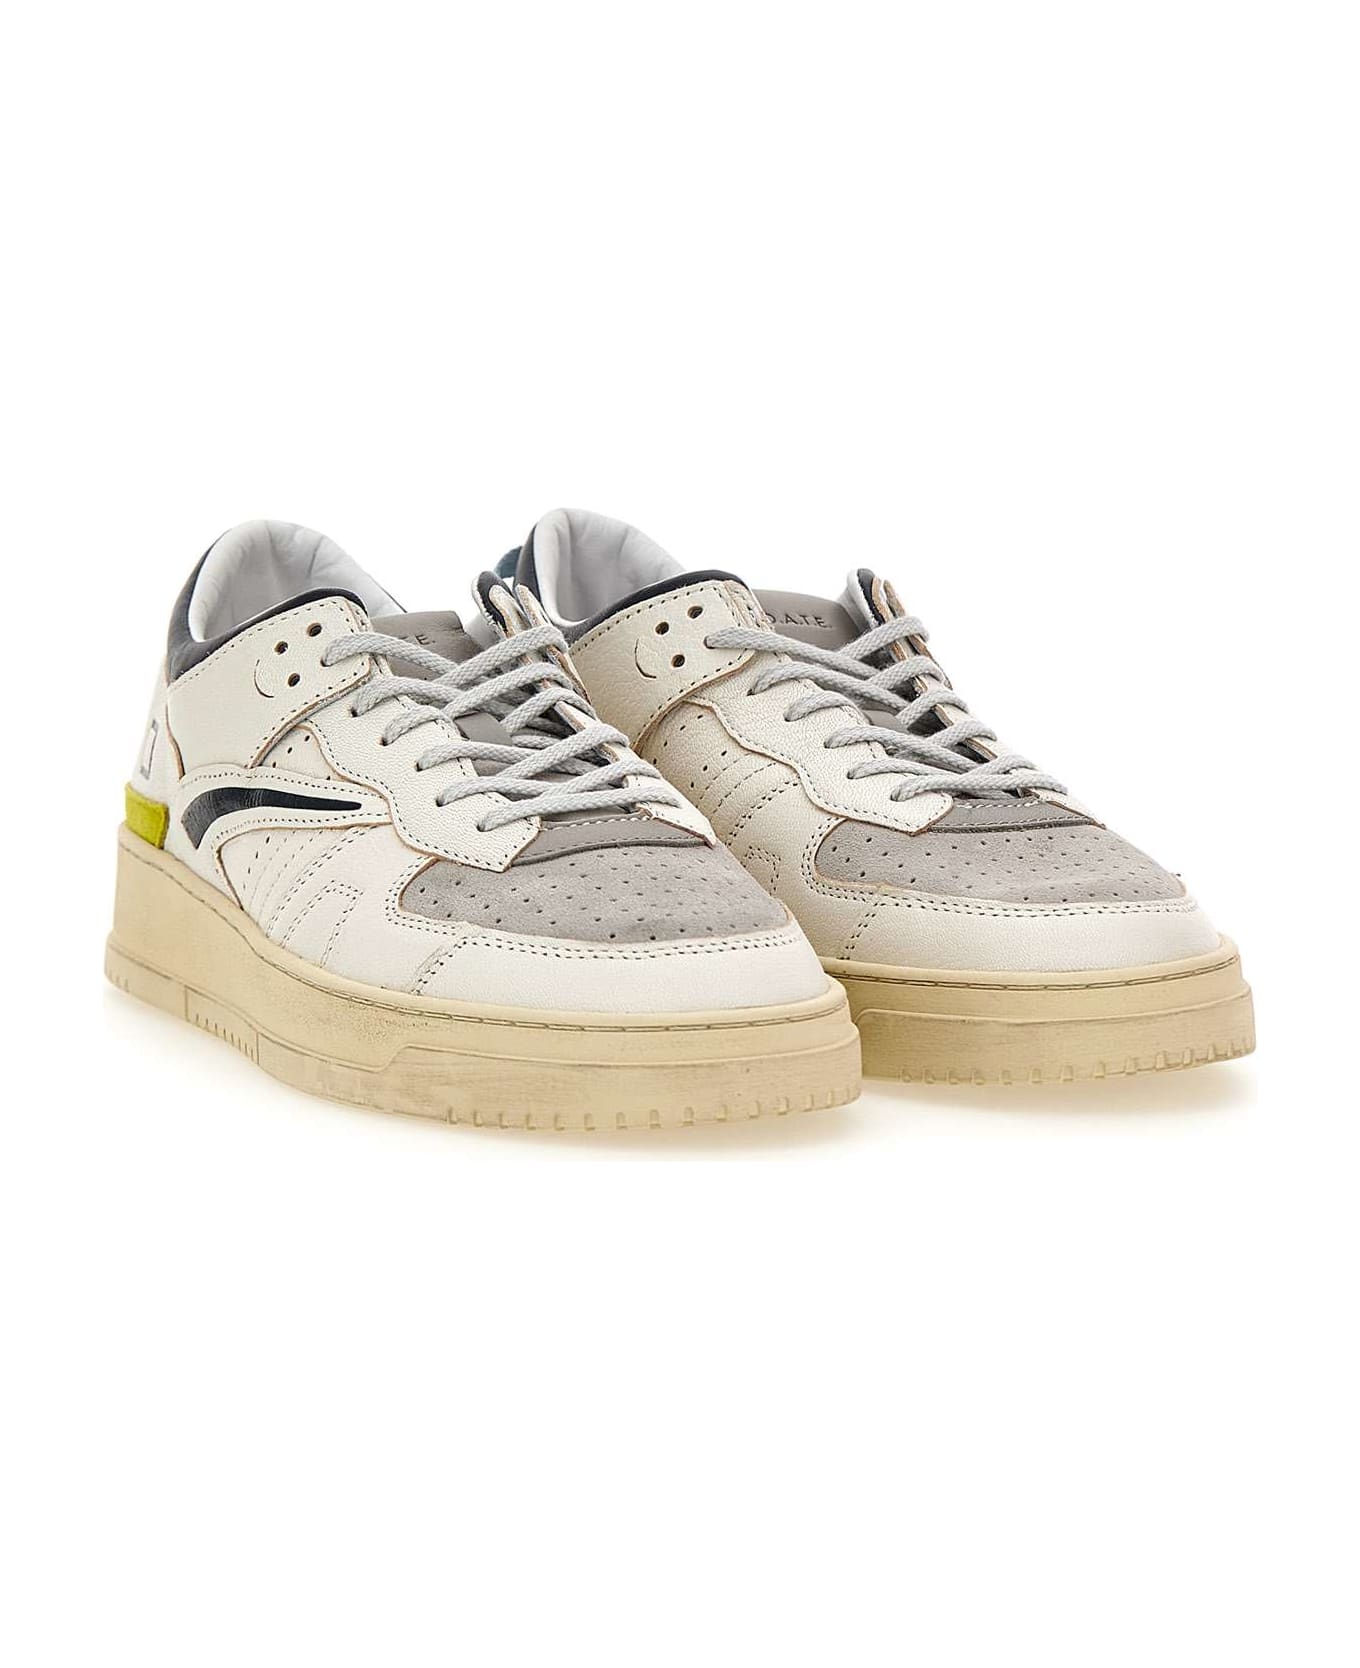 D.A.T.E. "torneo Colored" Leather Sneakers - WHITE スニーカー